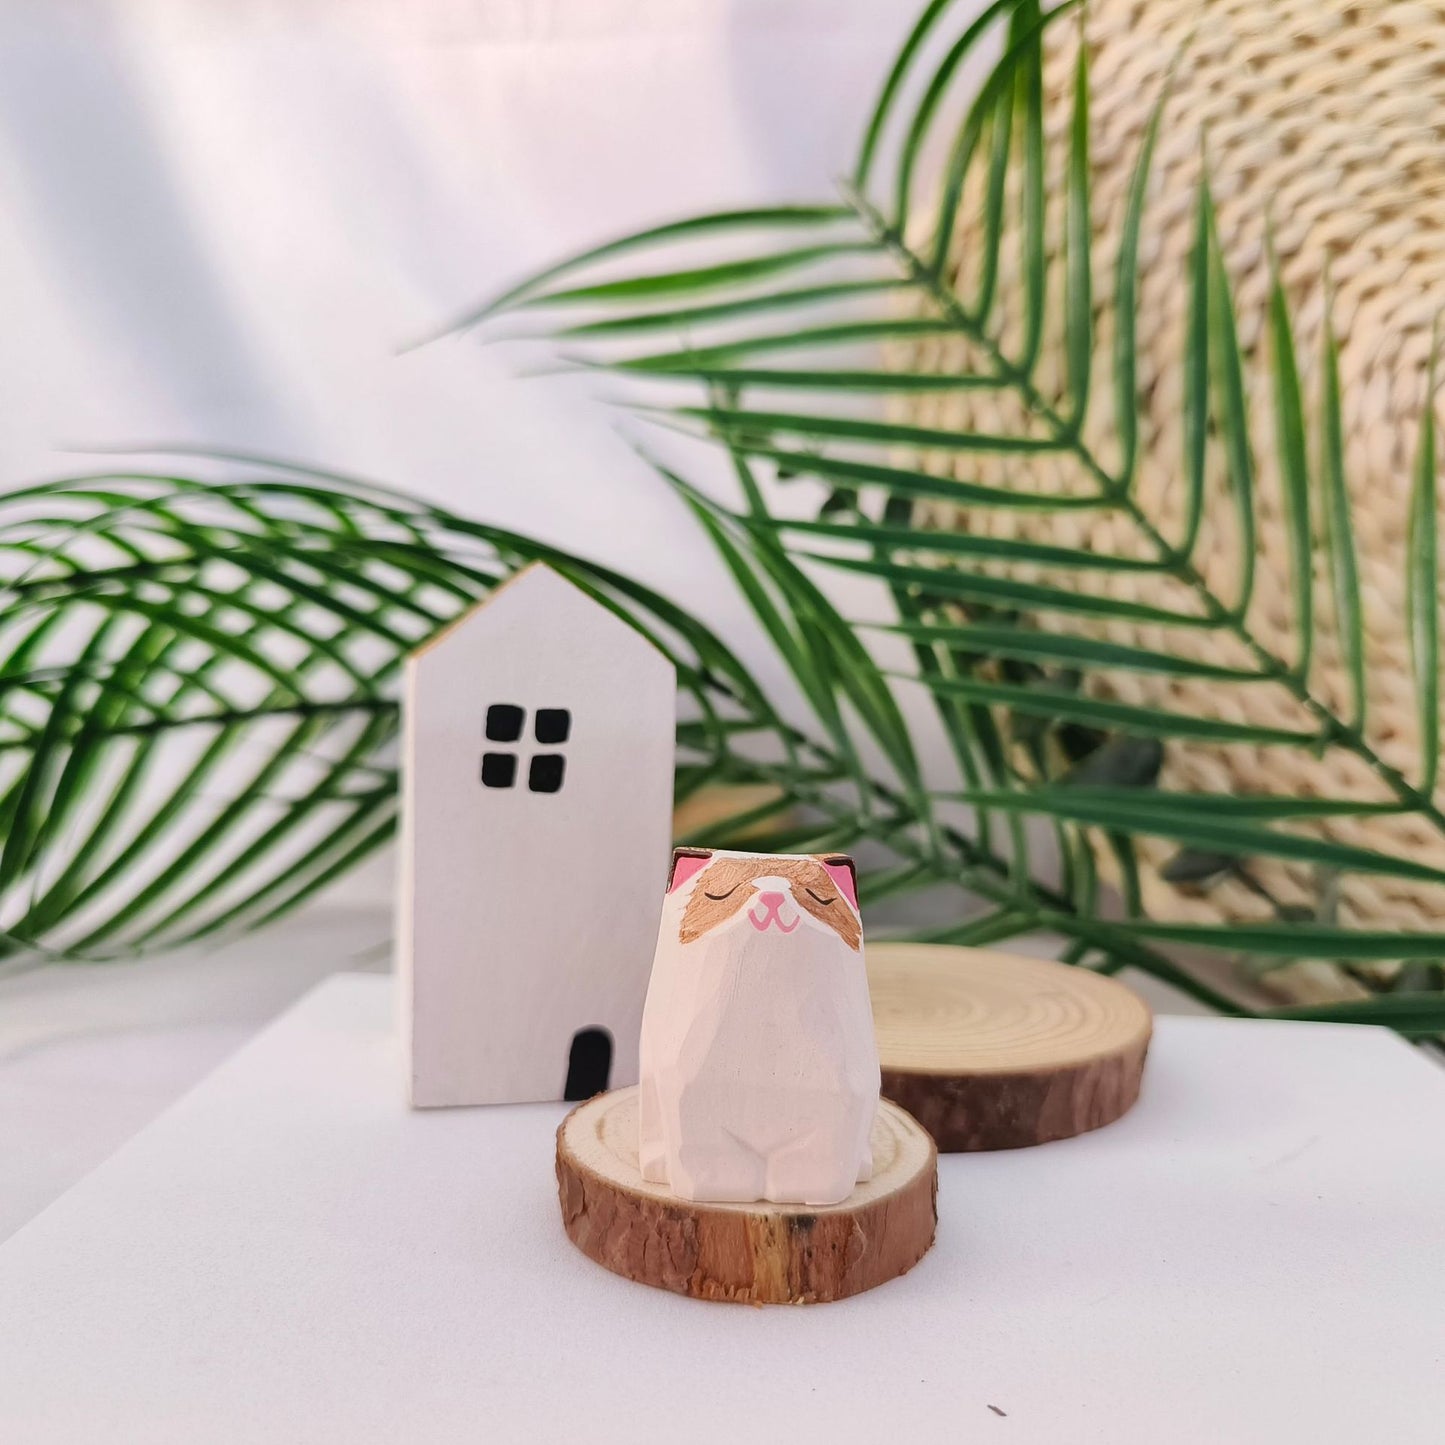 Gohobi Handcrafted Wooden Sitting Cats Ornament